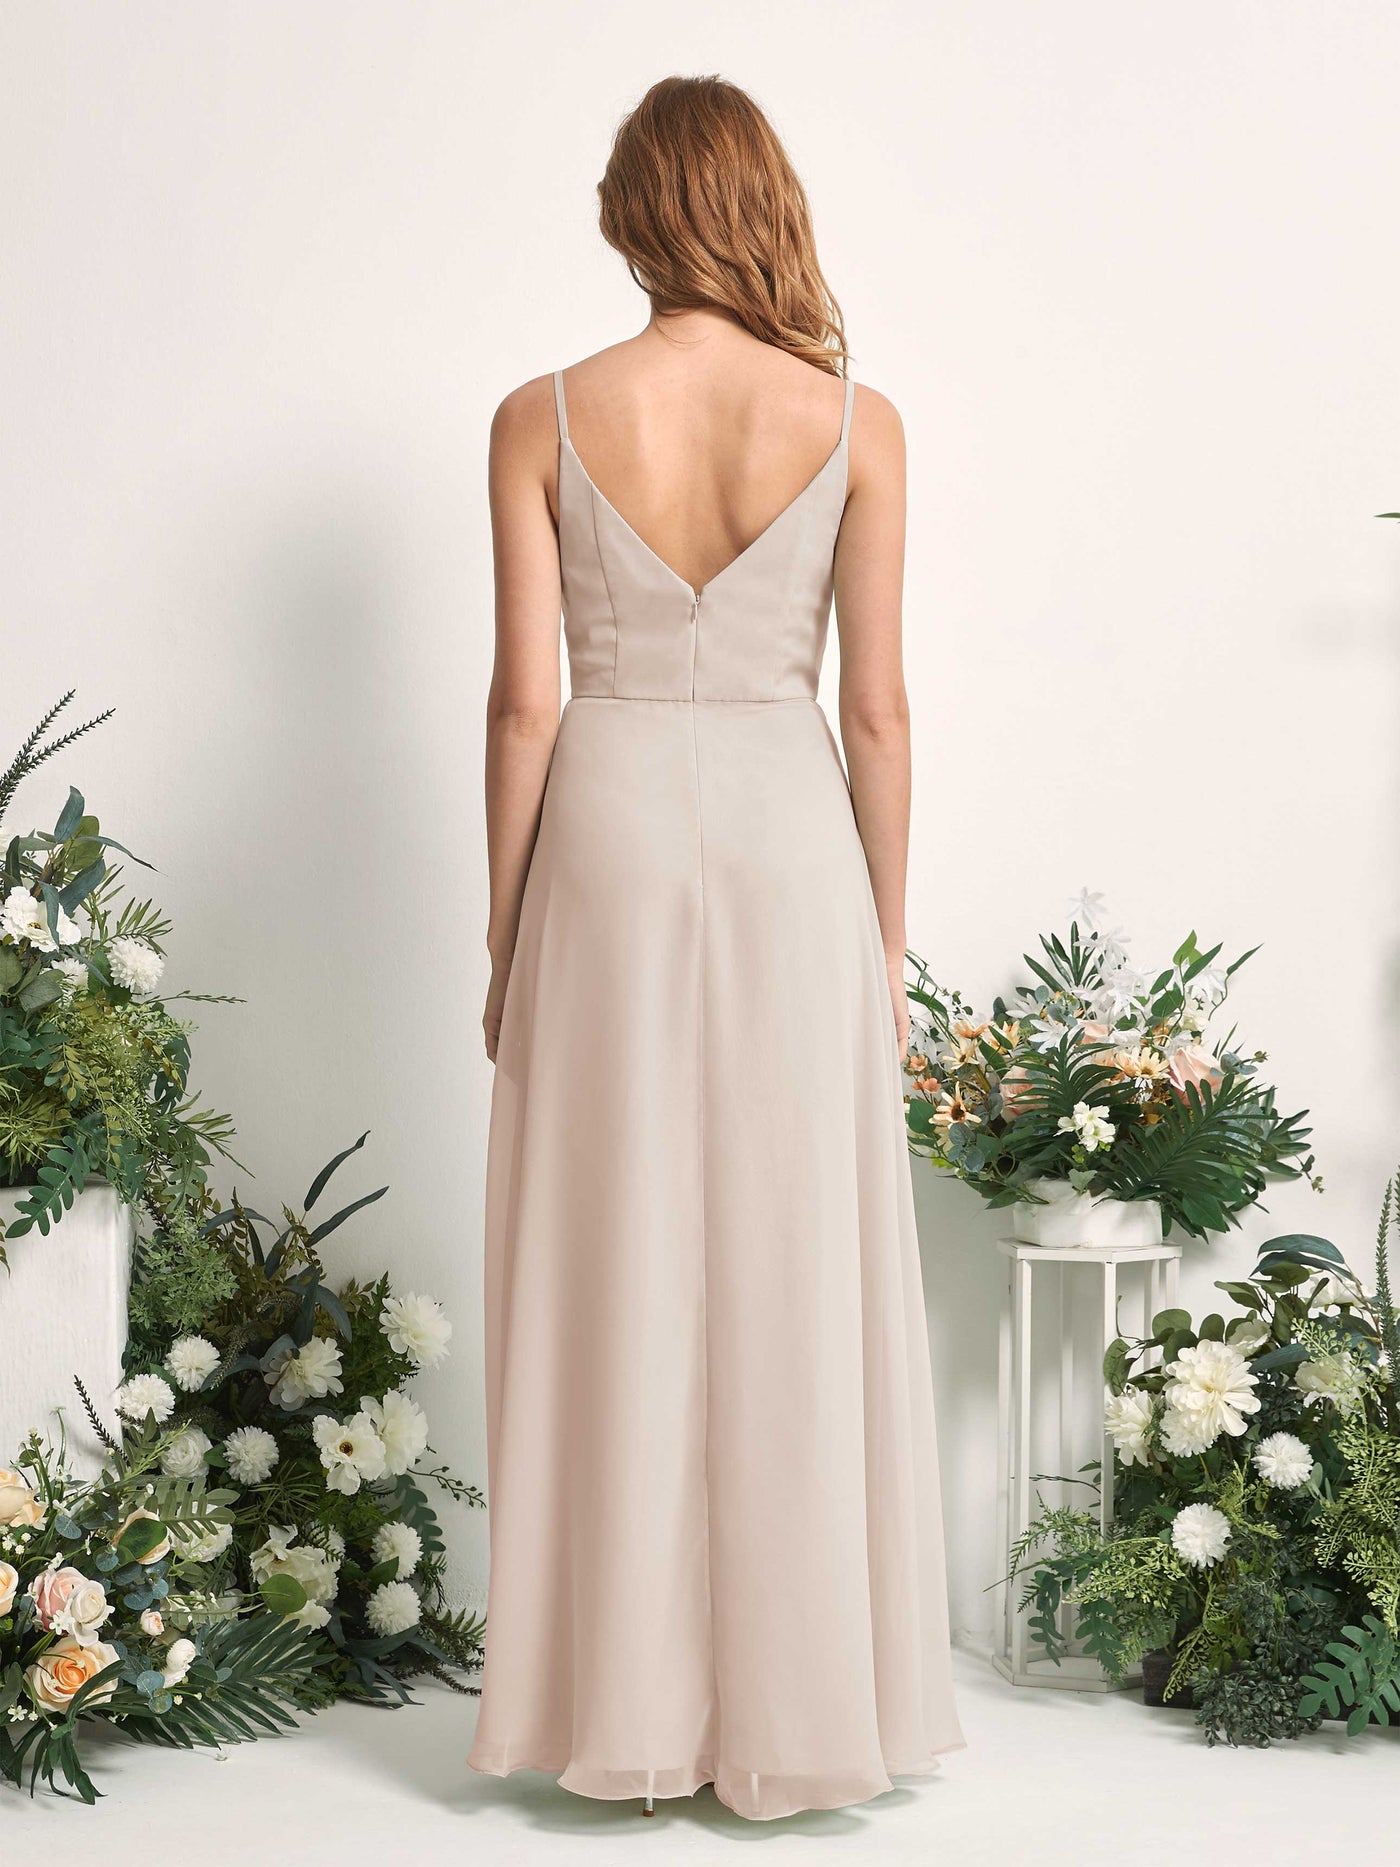 Bridesmaid Dress A-line Chiffon Spaghetti-straps Full Length Sleeveless Wedding Party Dress - Champagne (81227216)#color_champagne